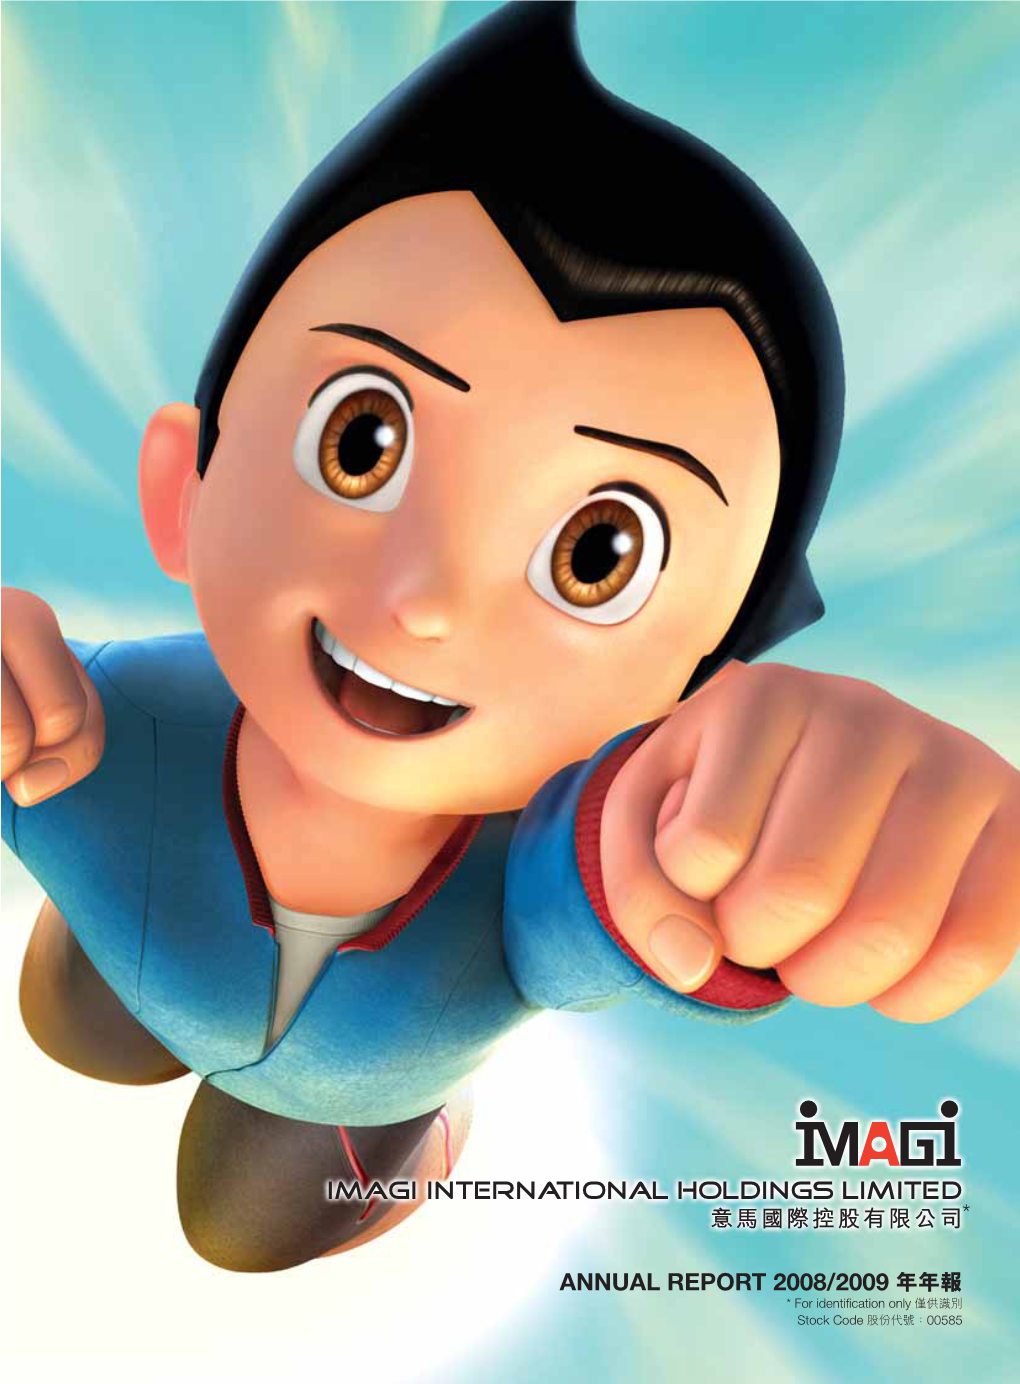 Annual Report 2008/2009 the Prime Focus of the Production Team Over the Last Twelve Months Has Been on Astro Boy